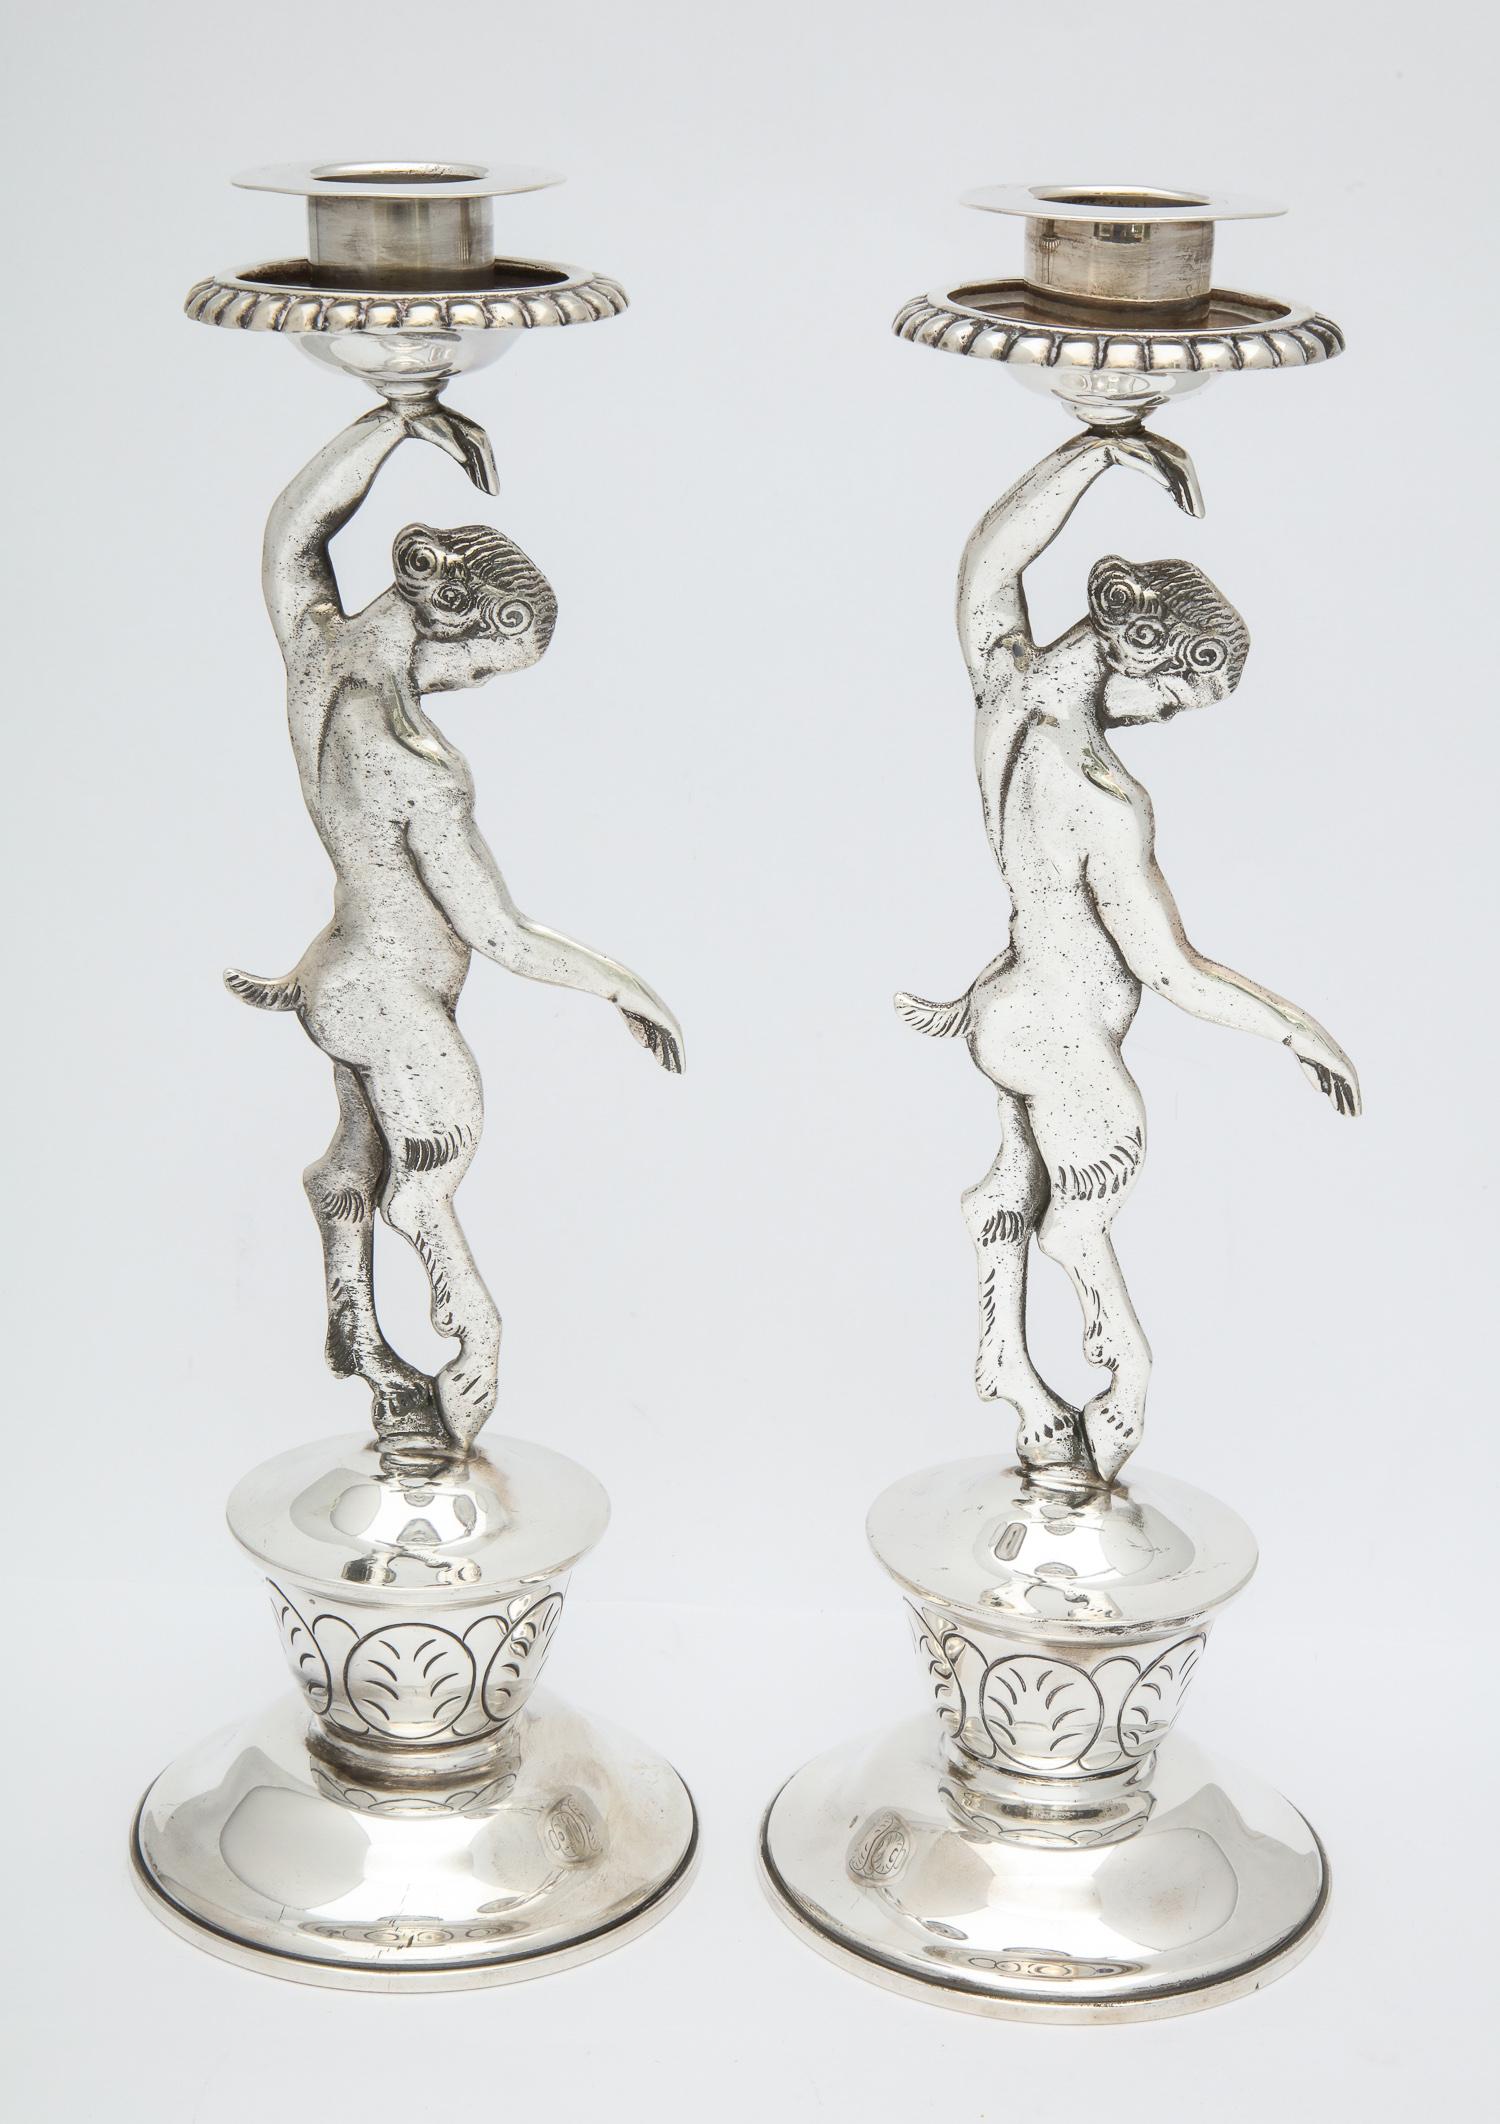 Rare pair of midcentury Mexican, sterling silver, satyr-form candlesticks, Mexico, circa 1950s, Conquistador Silver Company - makers. The stem of each candlestick is a full-bodied satyr, one side of each candlestick showing the satyr's front side;